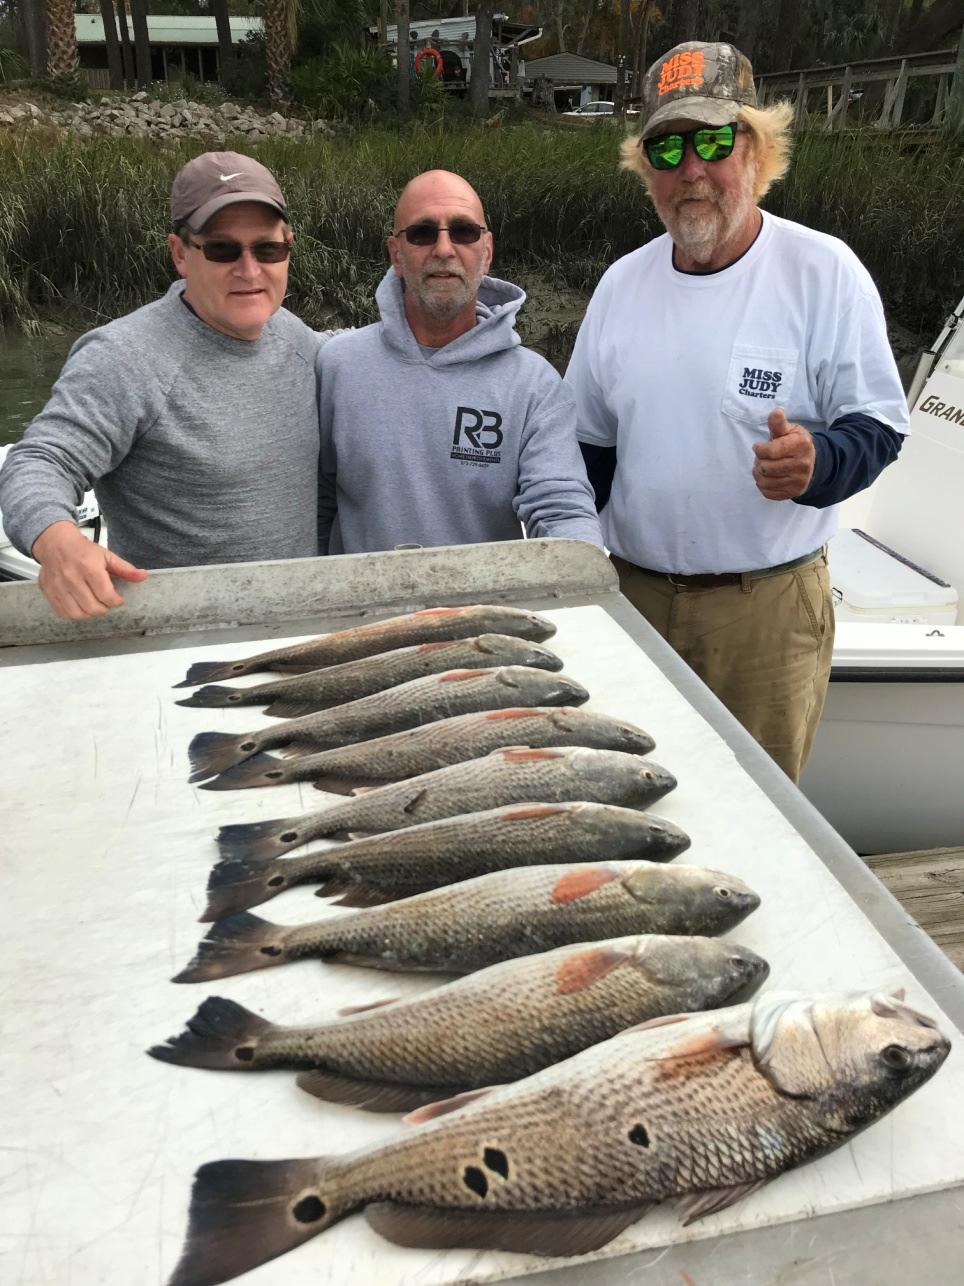 Rich Bischoff and Rick Degraw both visiting from New Jersey had great catching time inshore fishing with Captain Tommy Williams